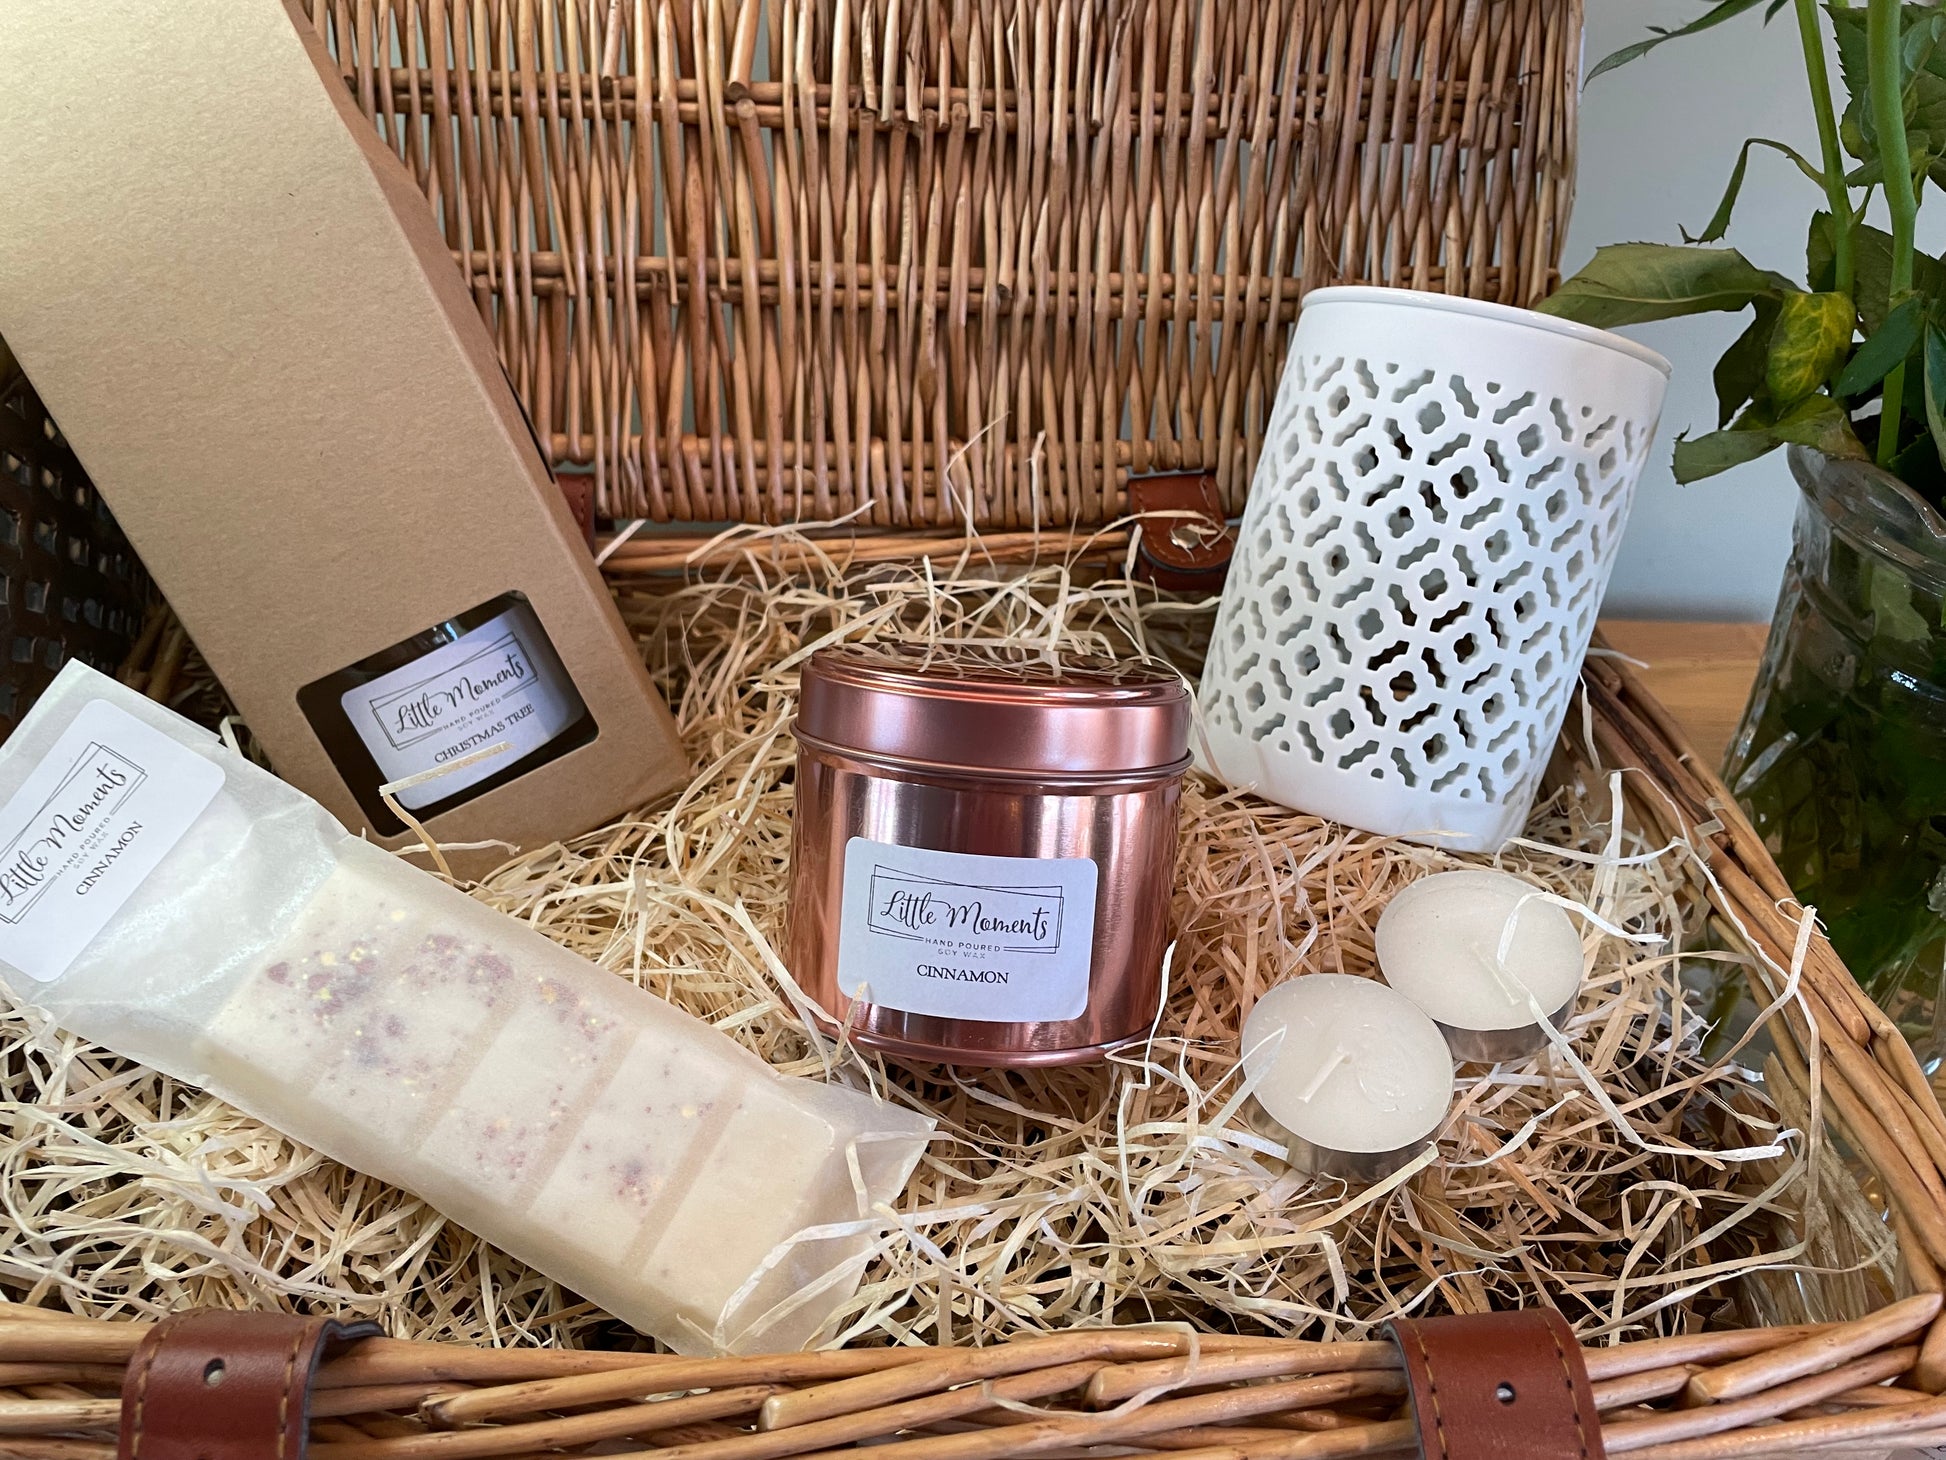 luxury wicker gift hamper with a reed diffuser 20cl fragrance candle in rose gold tin, wax melt snap bar and a dragonfly ceramic wax melt burner